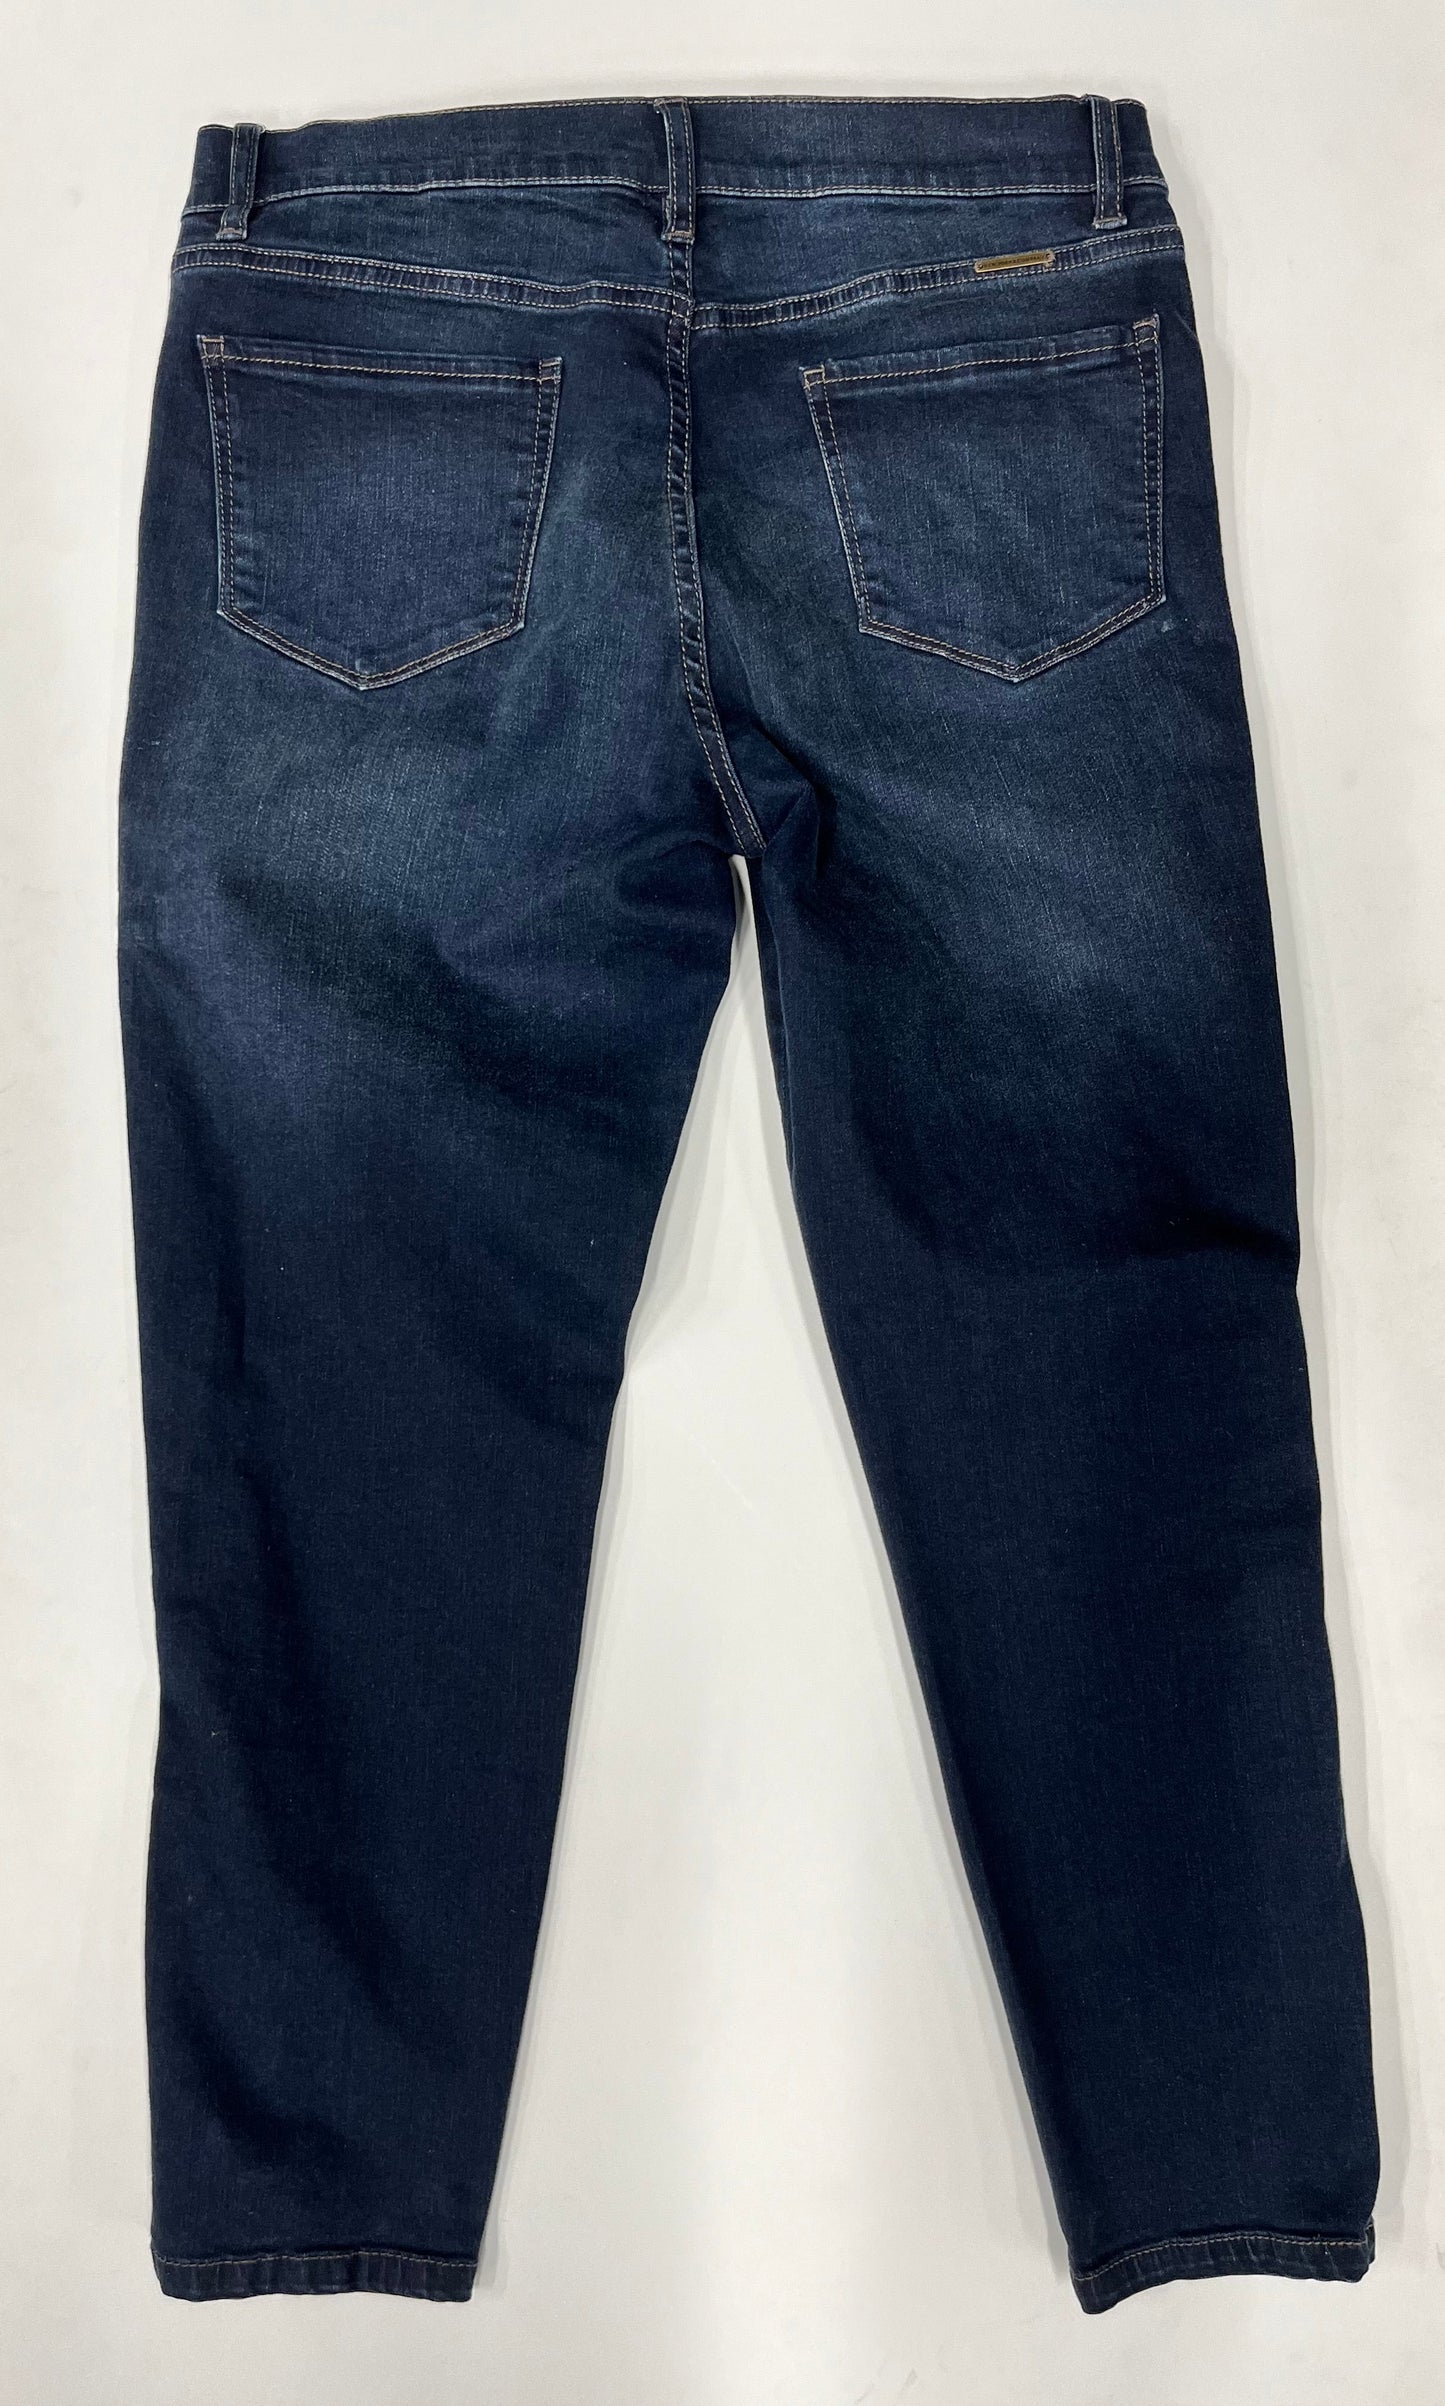 Jeans By New York And Co  Size: 10